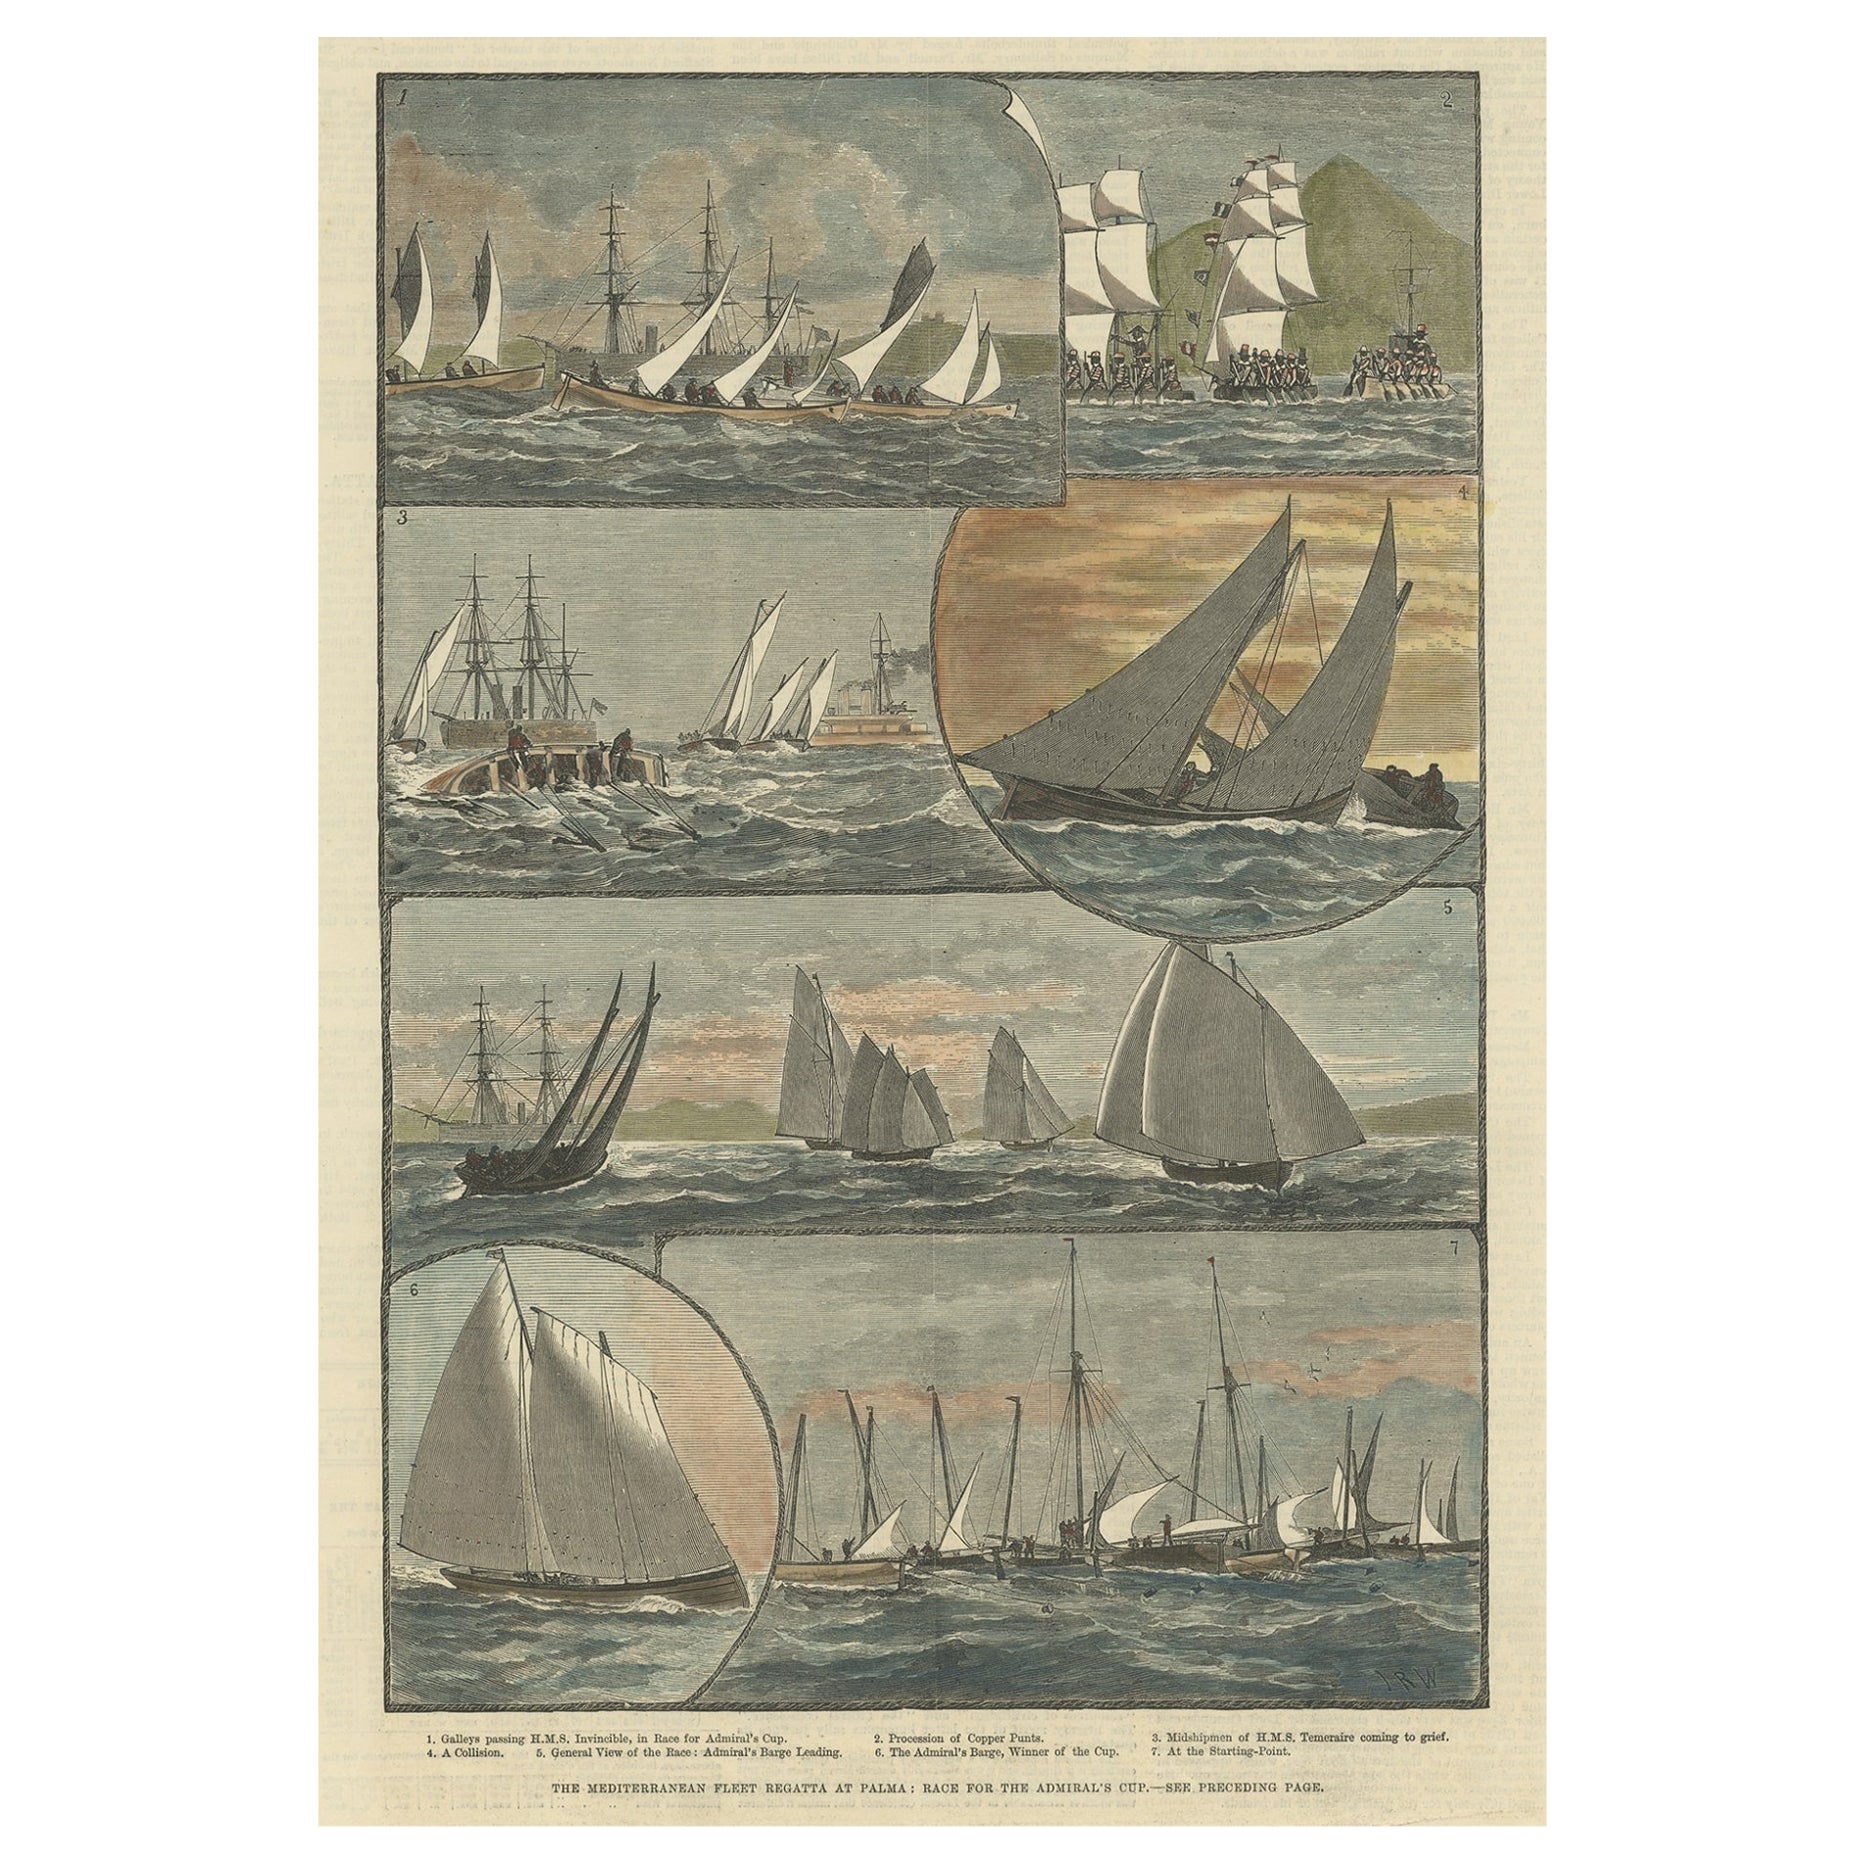 Antique Print of The Sailing Race for the Admiral's Cup at Palma, 1881